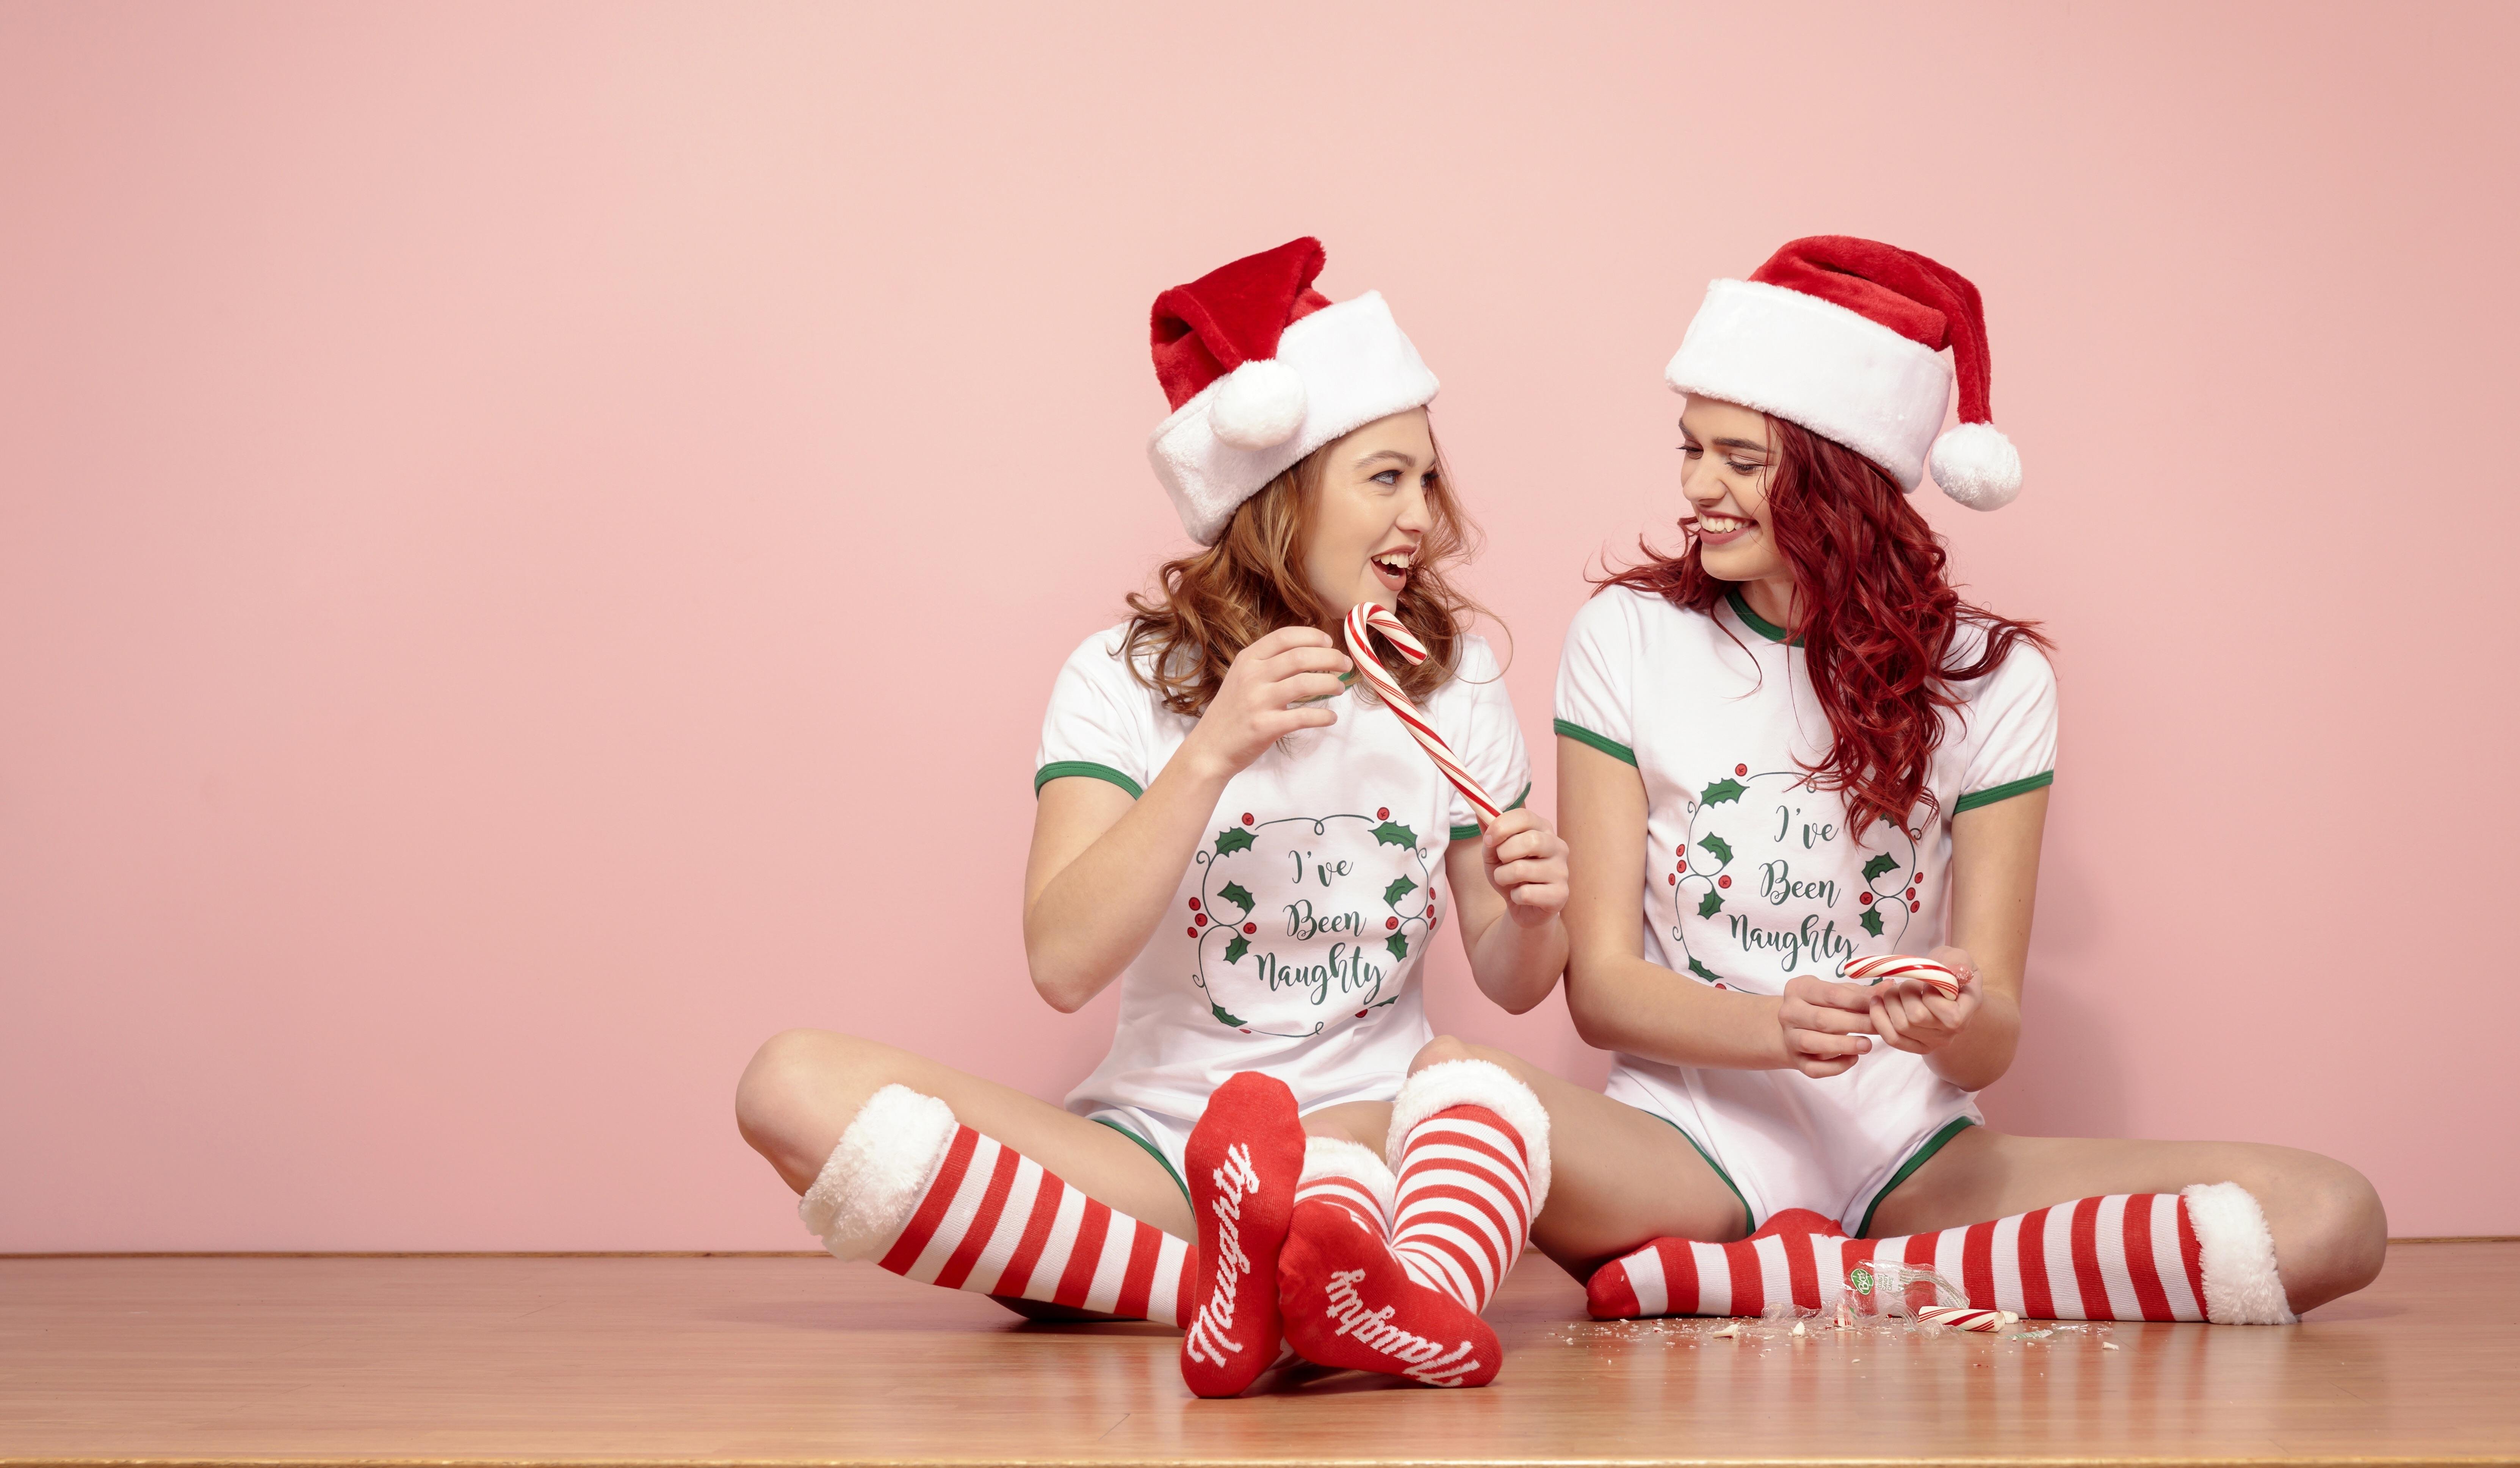 Happy Holidays everyone! I thought I’d share a little festive cheer from a shoot my little friend and I did for Littletude.